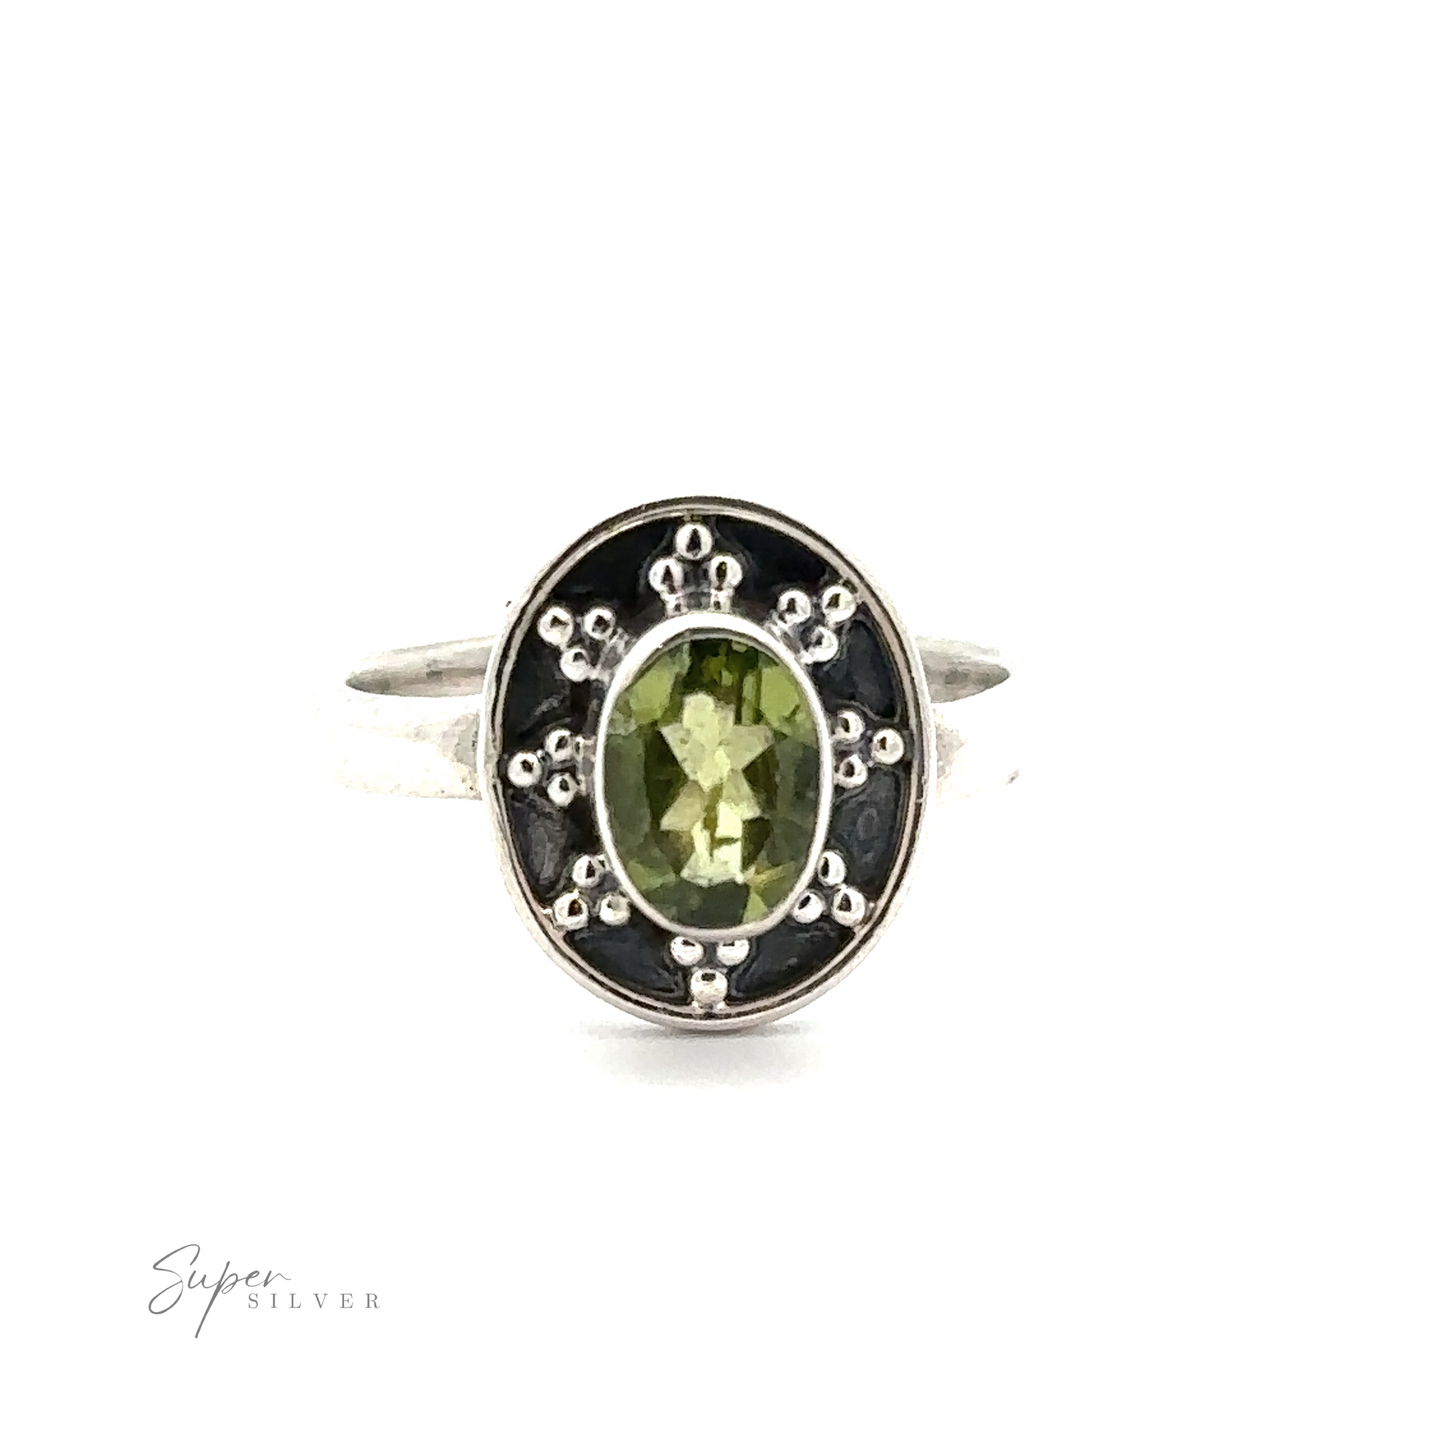 
                  
                    An Oval Gemstone Ring with Ball and Disk Border, with a central green gemstone surrounded by decorative metal details, exudes a vintage-inspired elegance. The brand name "Super Silver" is visible in the lower left corner.
                  
                